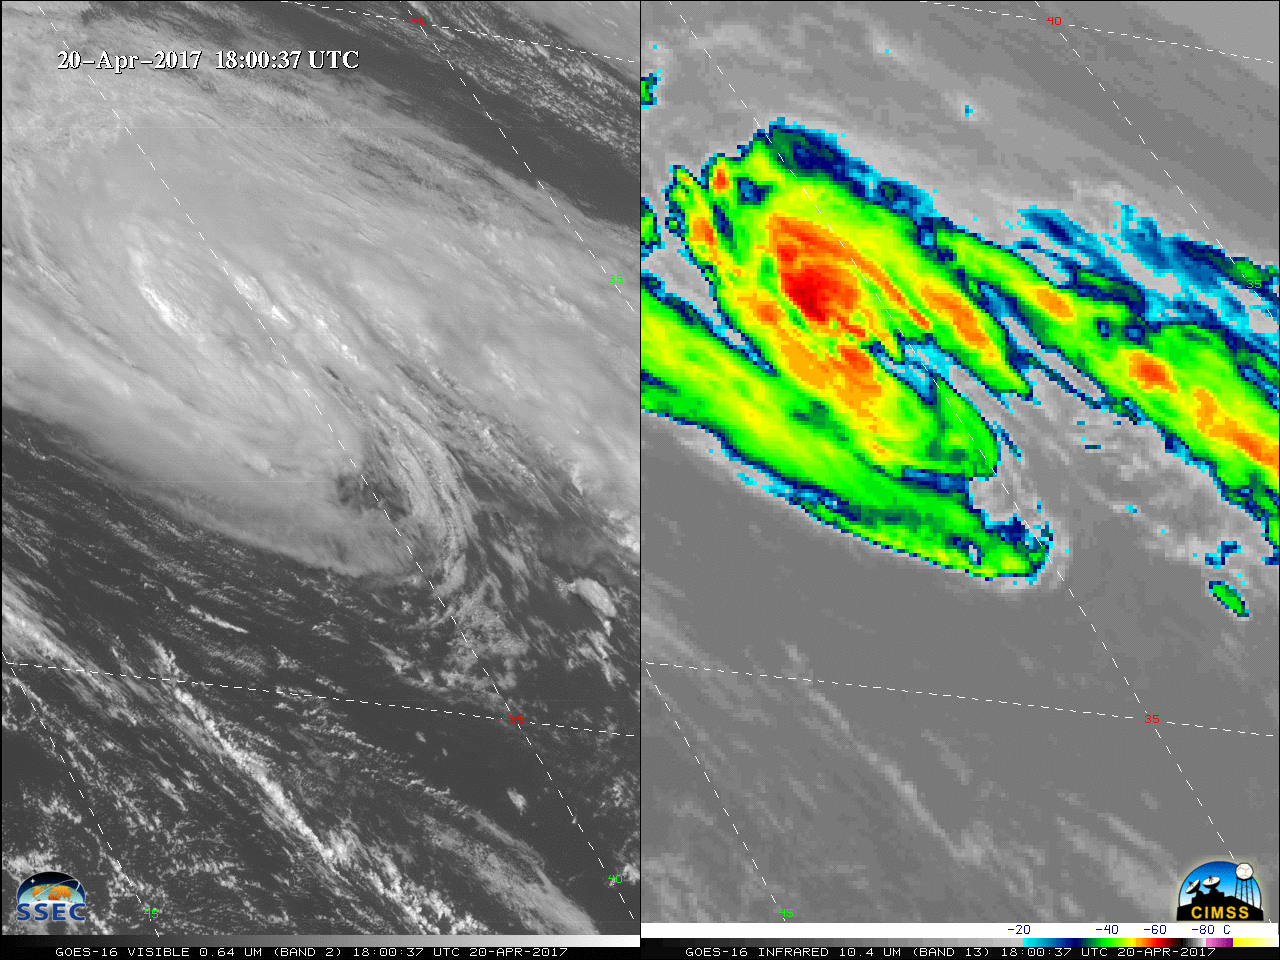 GOES-16 Visible (0.64 um, left) and Infrared Window (10.3 um, right) images [click to play animation]